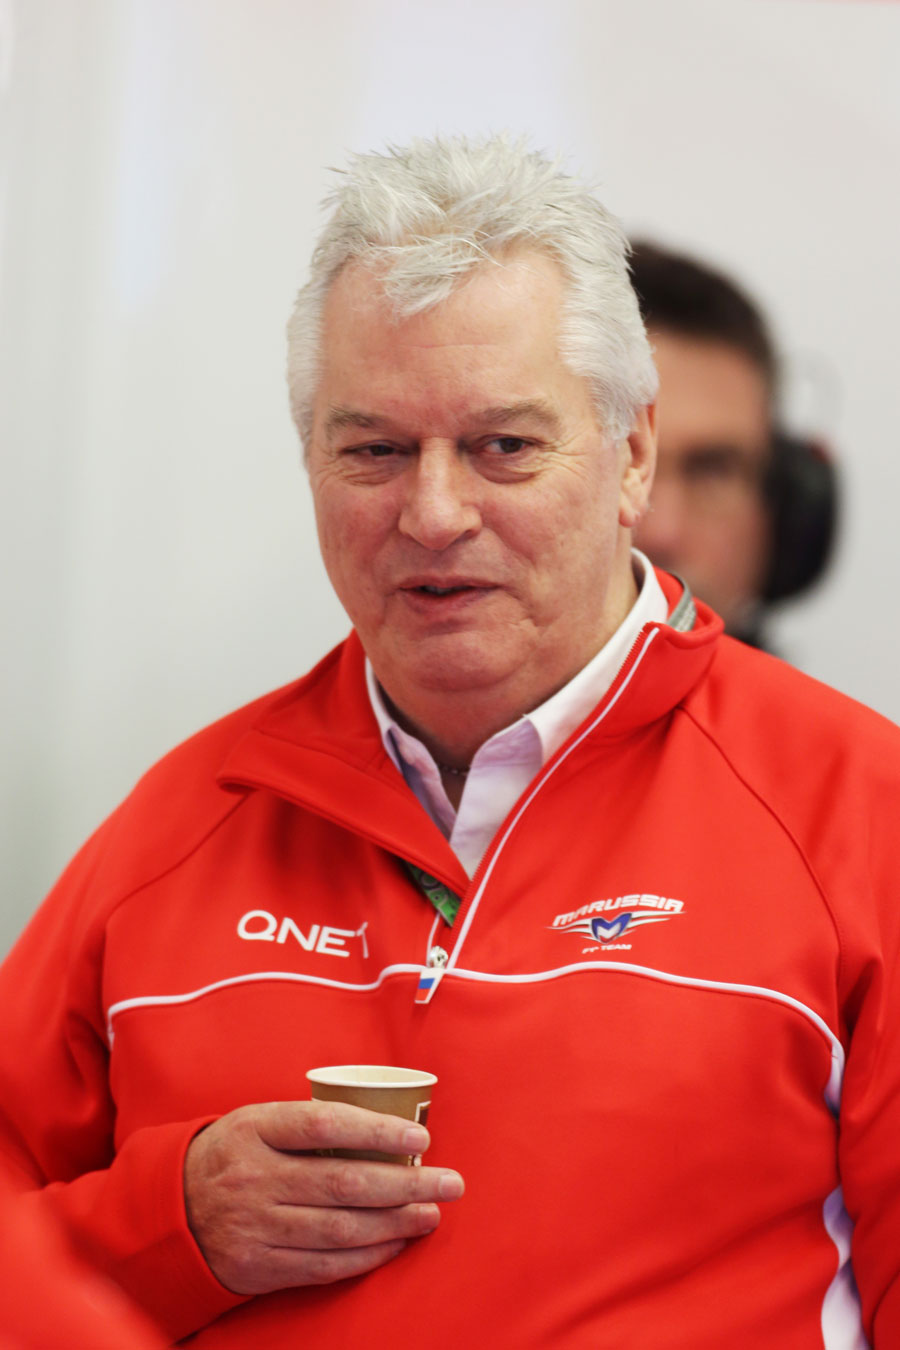 Technical director Pat Symonds in the Marussia garage